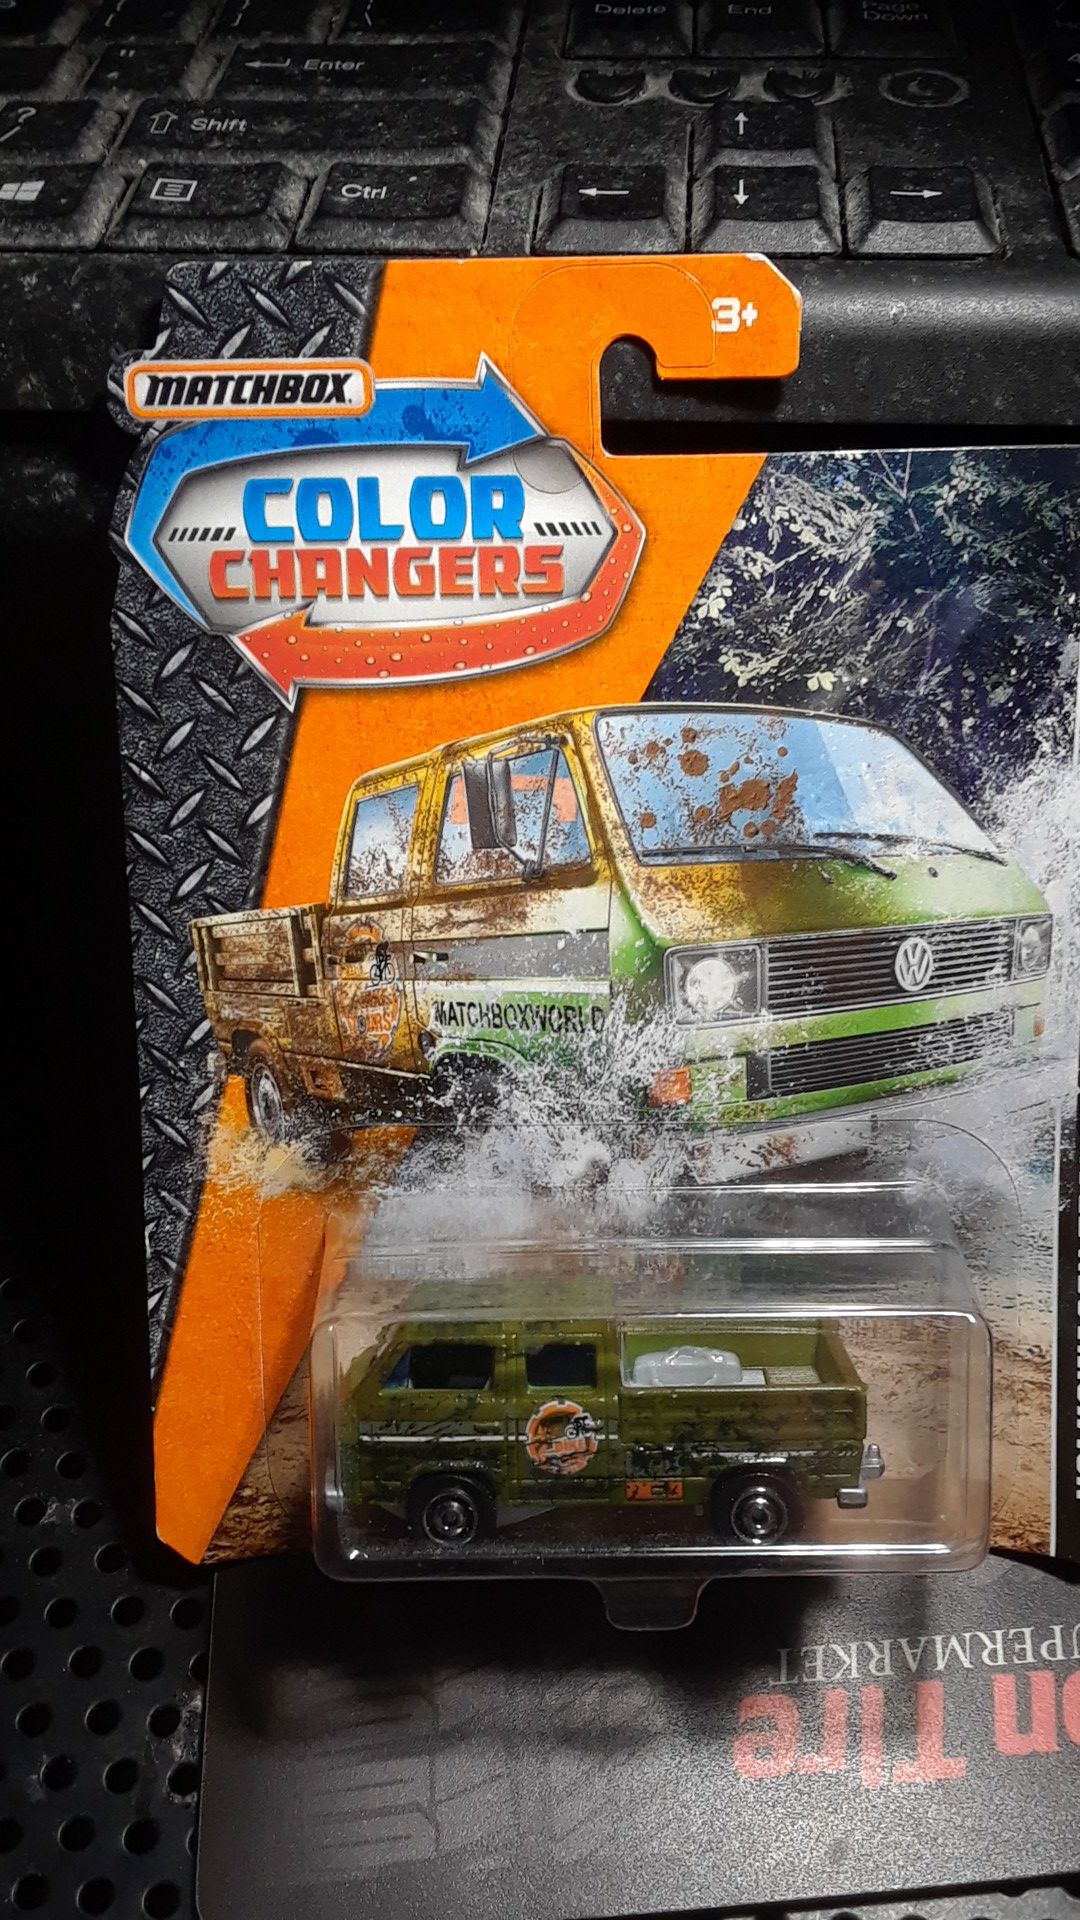 Matchbox color changers Volkswagen transporter scale 1:64 toy